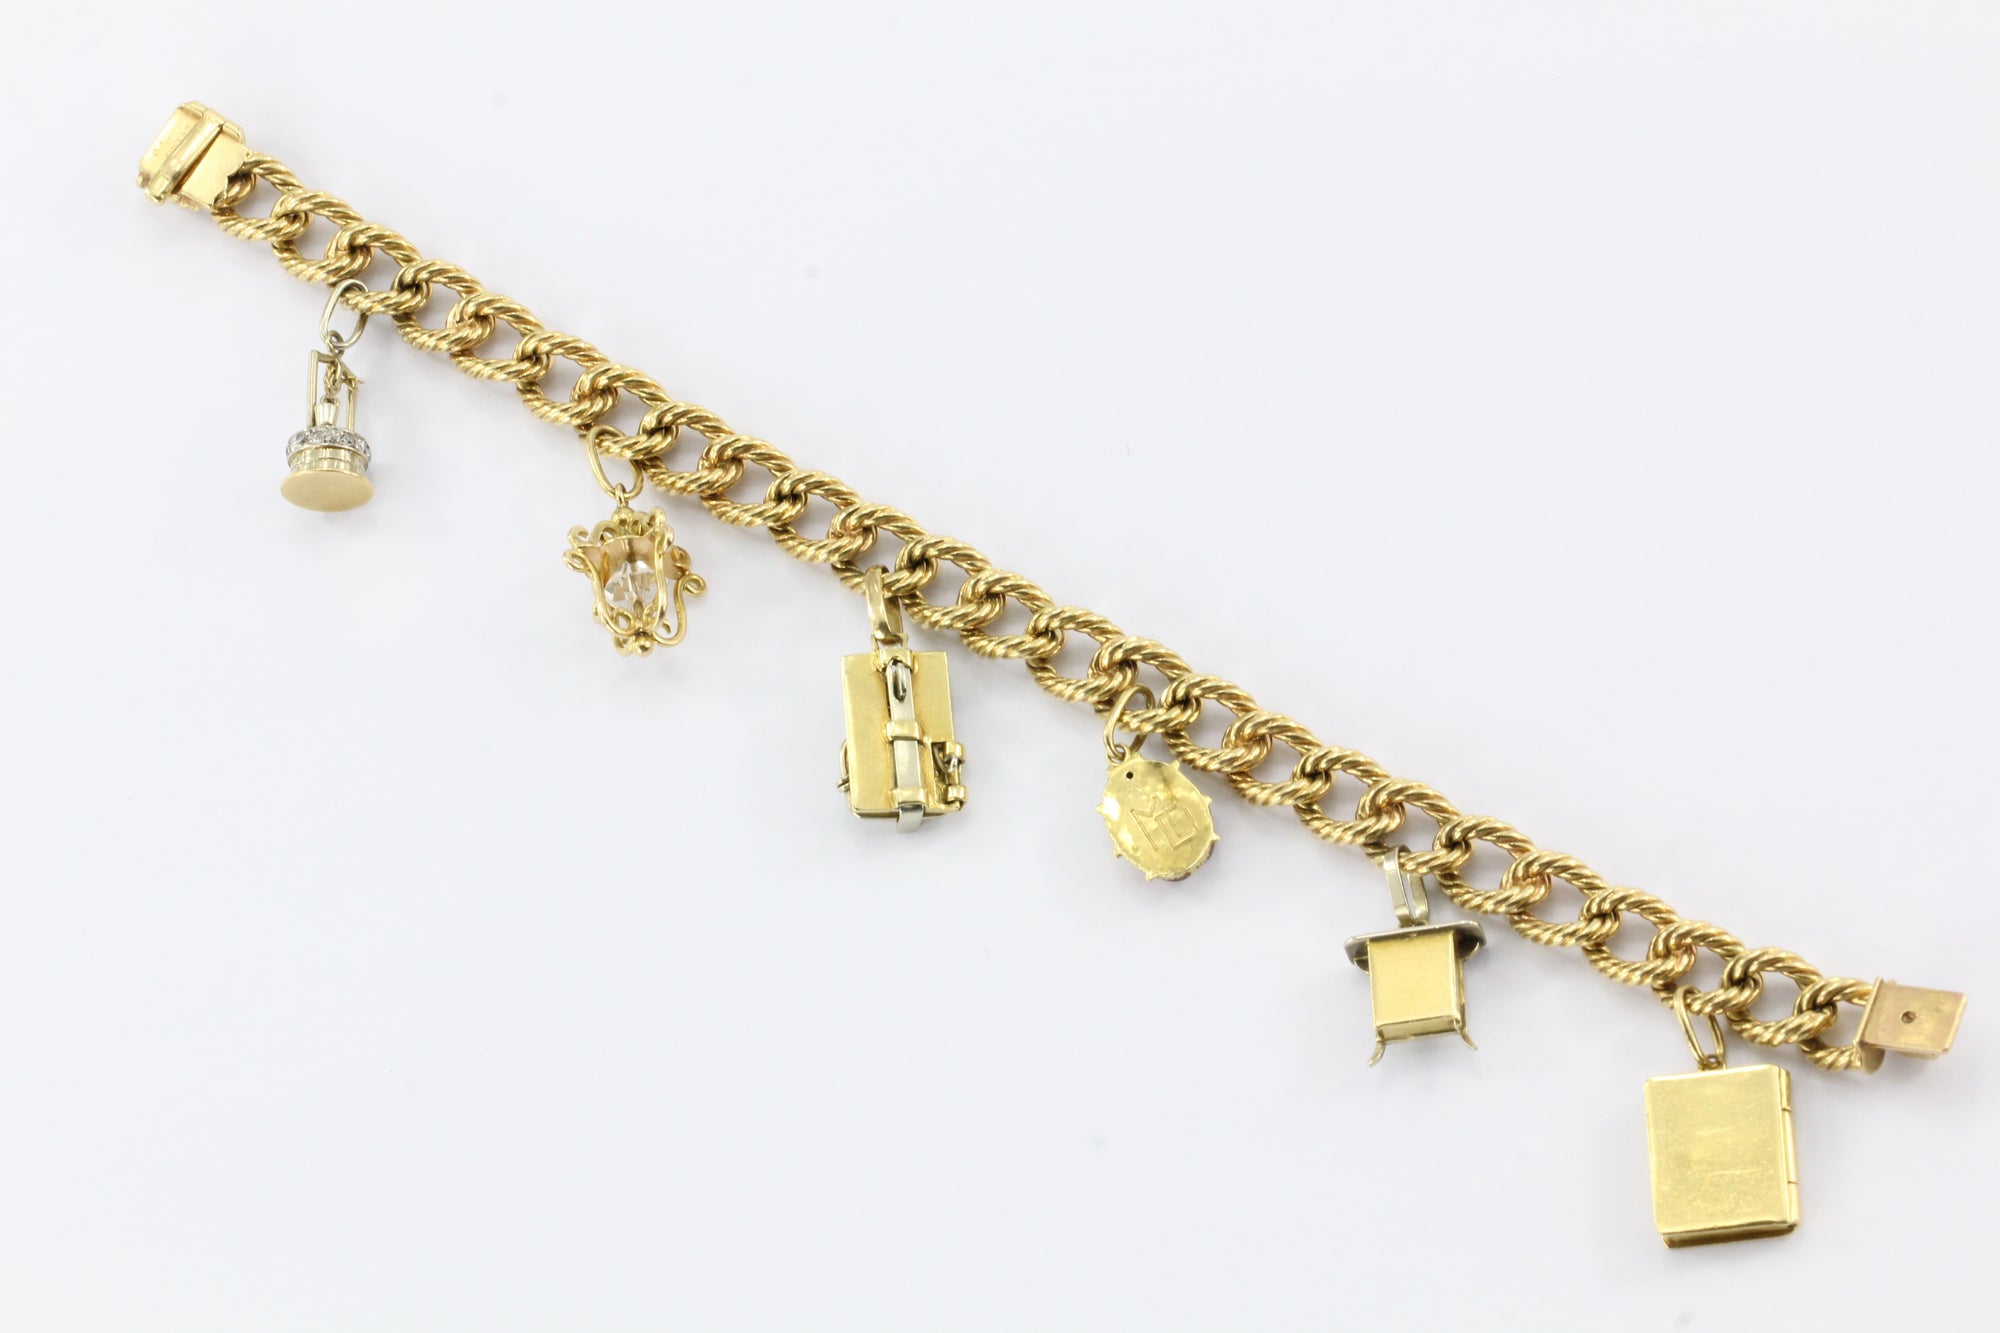 Cartier 18K Gold French Retro Loaded Charm Bracelet c.1950's – QUEEN MAY